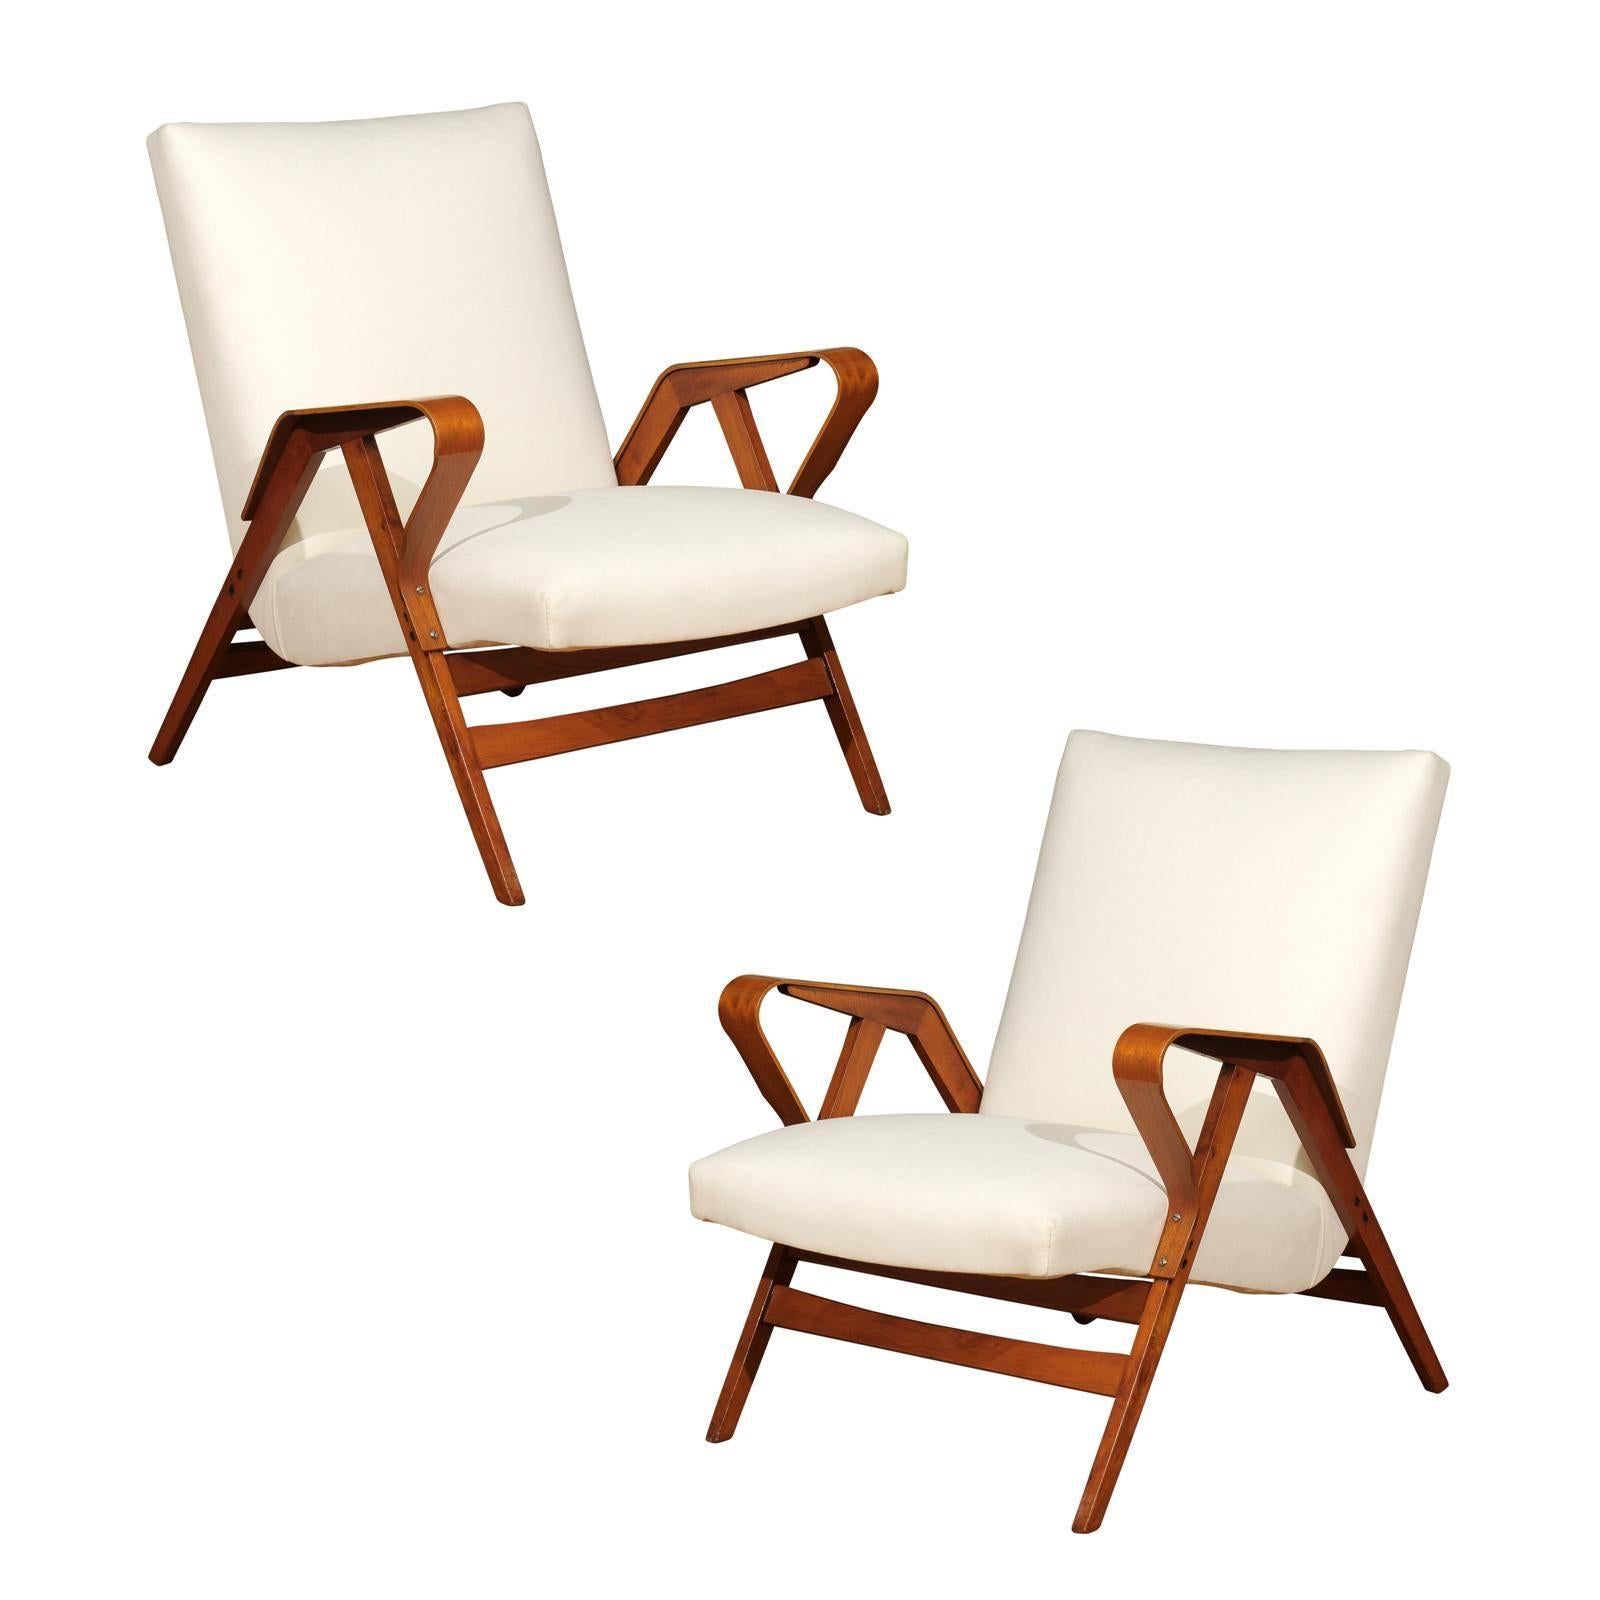 Gorgeous Pair of Restored Vintage Loungers in Maple and Mahogany